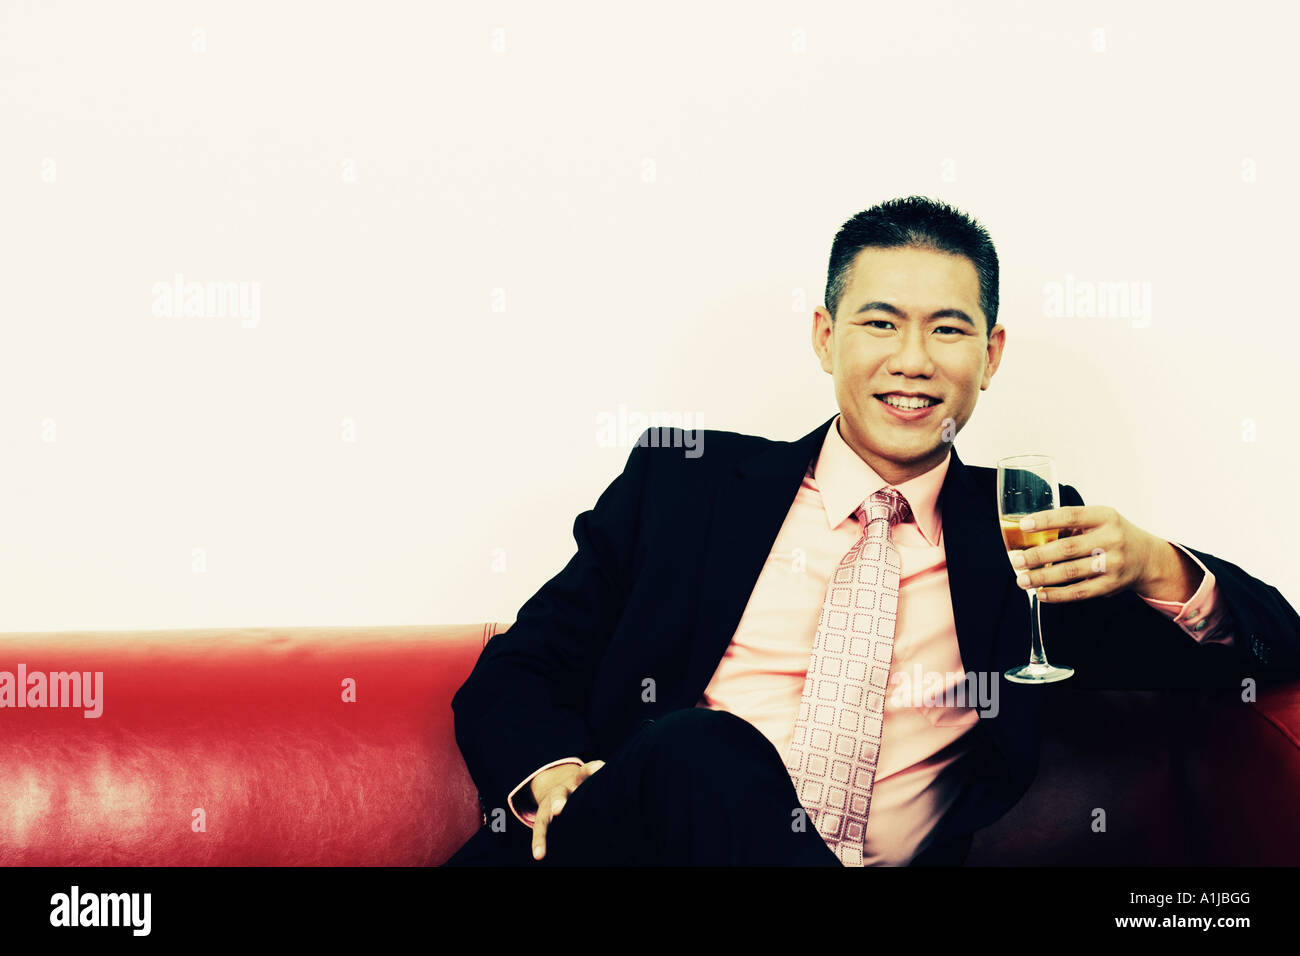 Portrait of a businessman holding a champagne flute and smiling Stock Photo